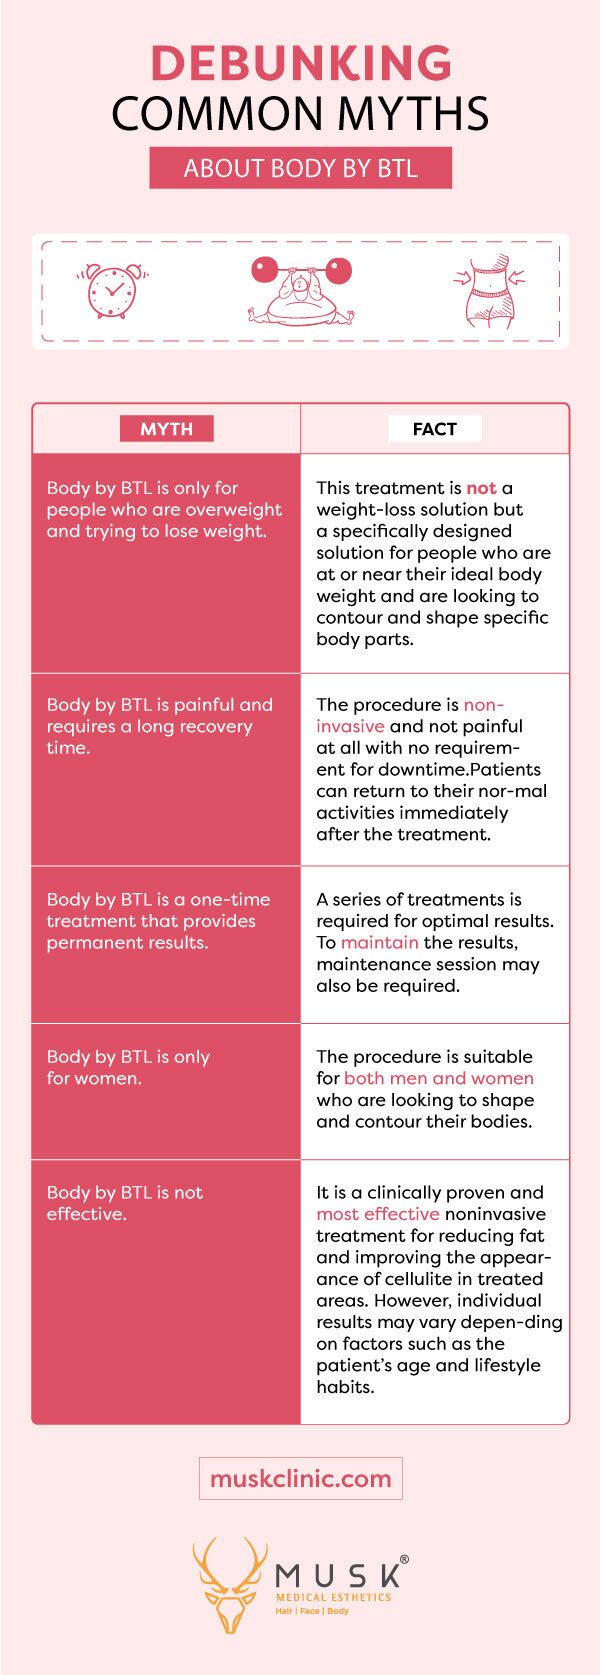 Debunking Common Myths about Body by BTL infographic